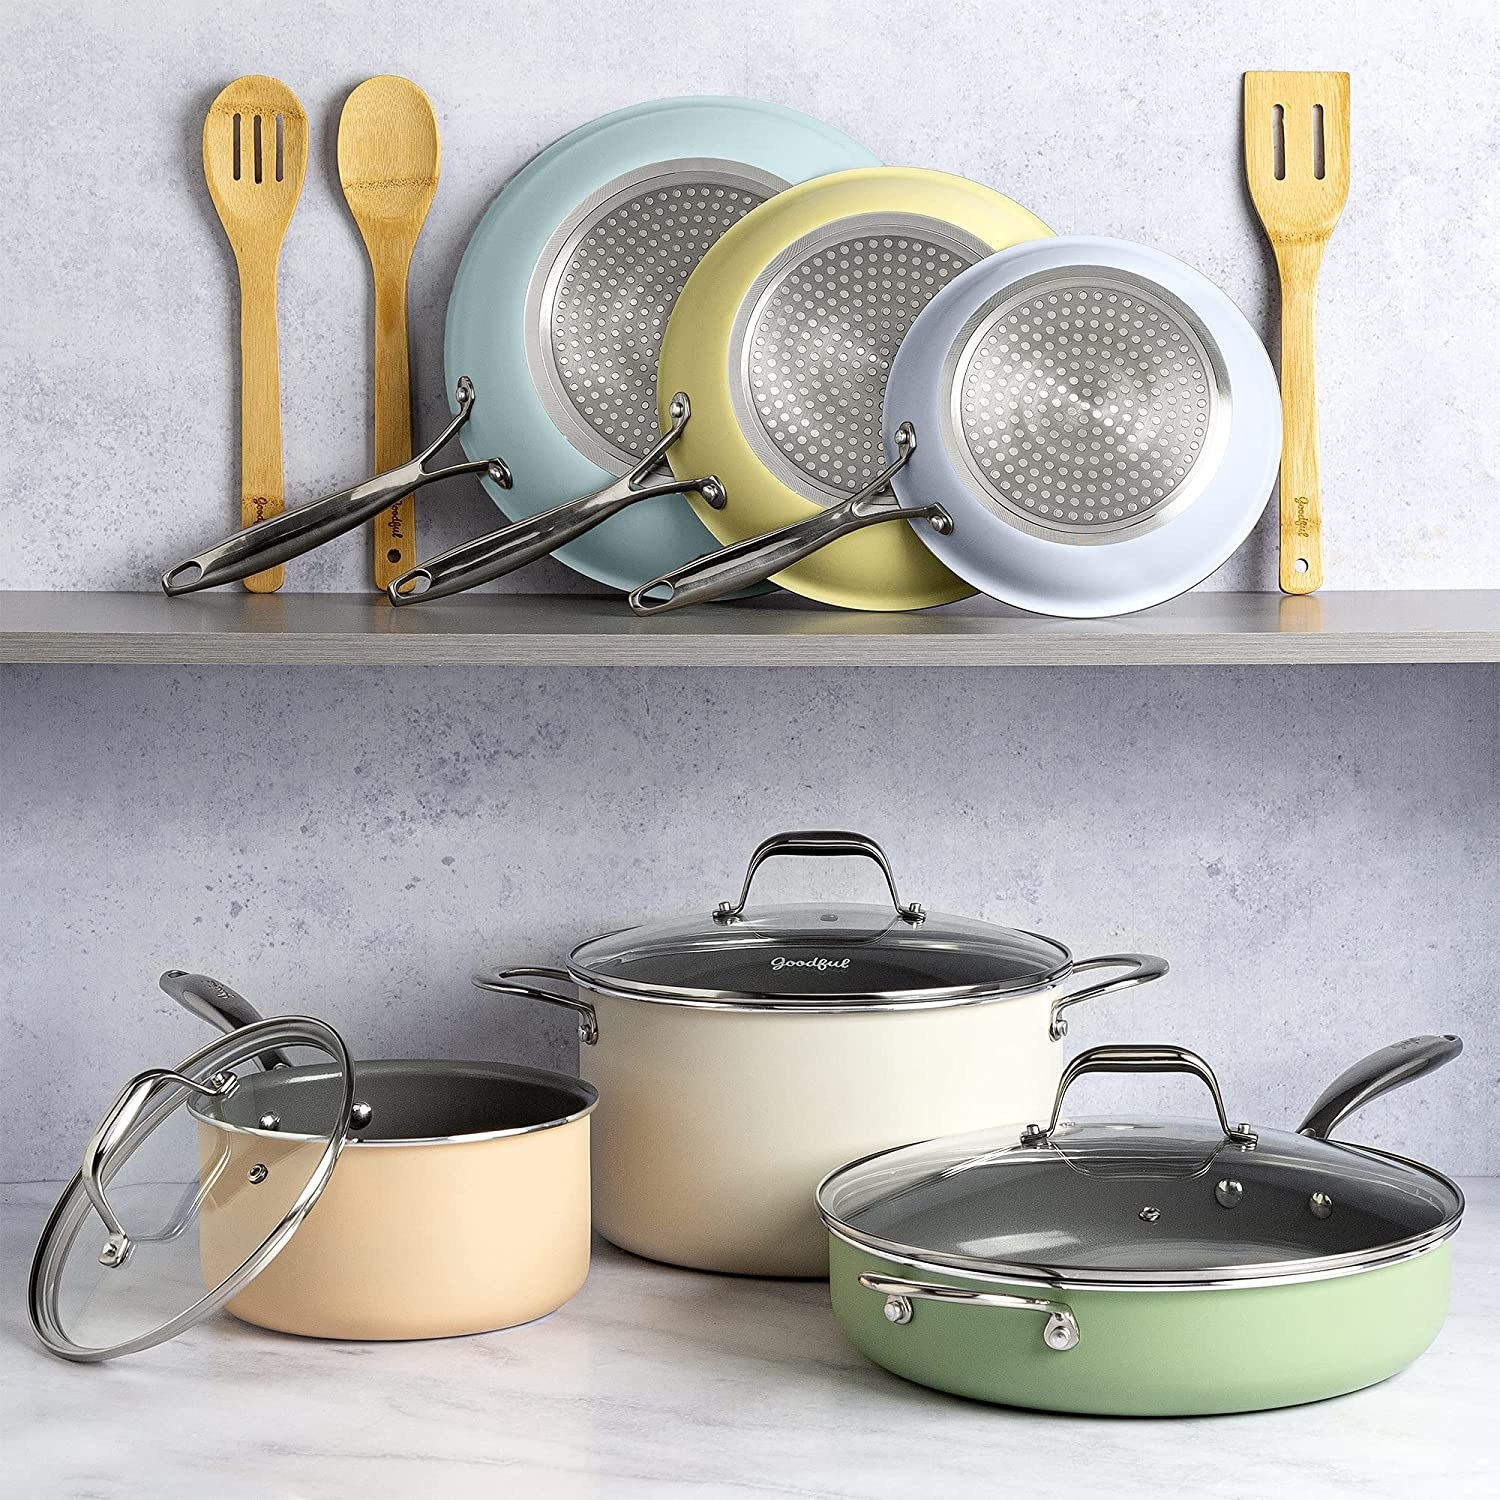 Multicolored pots, pans, and bamboo spatulas lined up on kitchen shelf and countertop